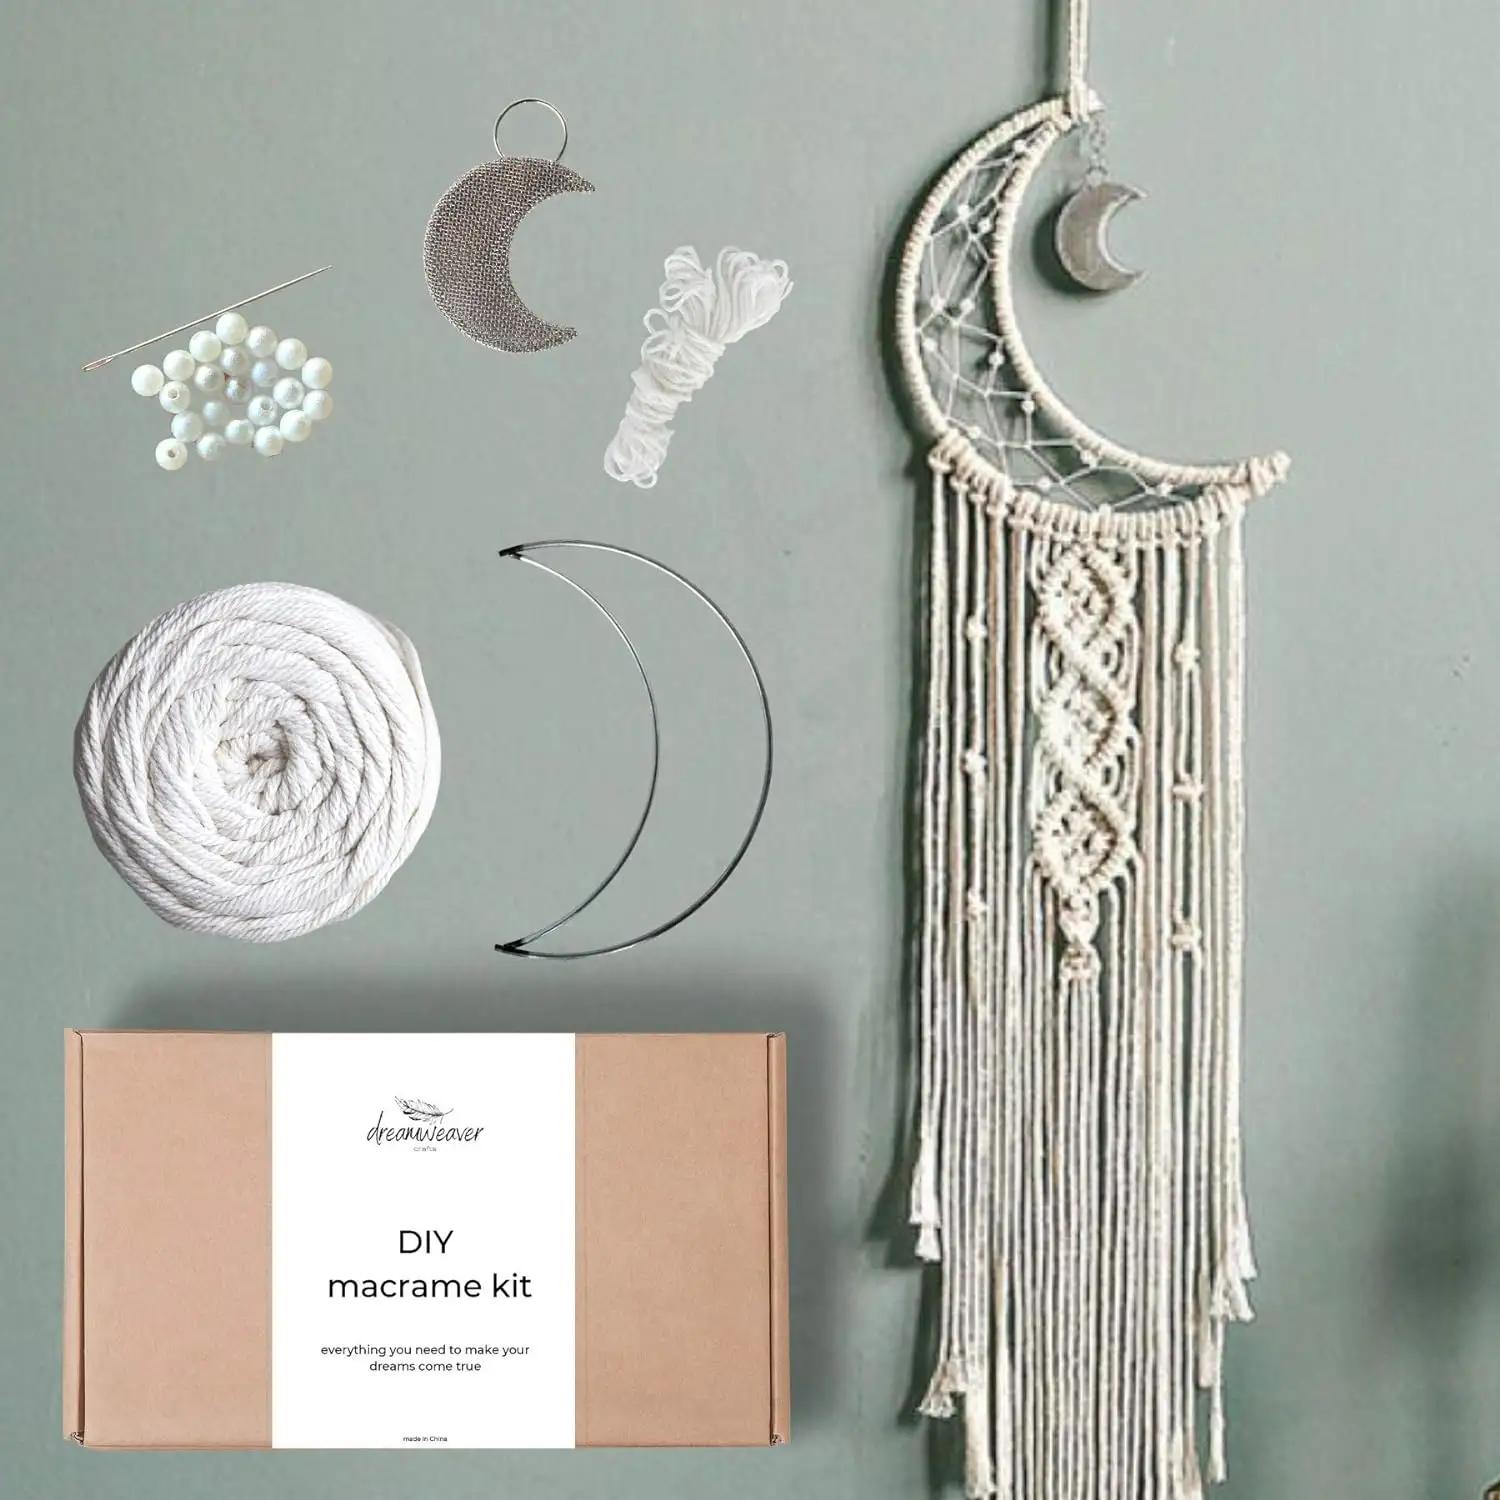 Wholesale Make your own minimalist bohemian style home decor wall hanging cotton rope moon macrame diy dreamcatcher kit